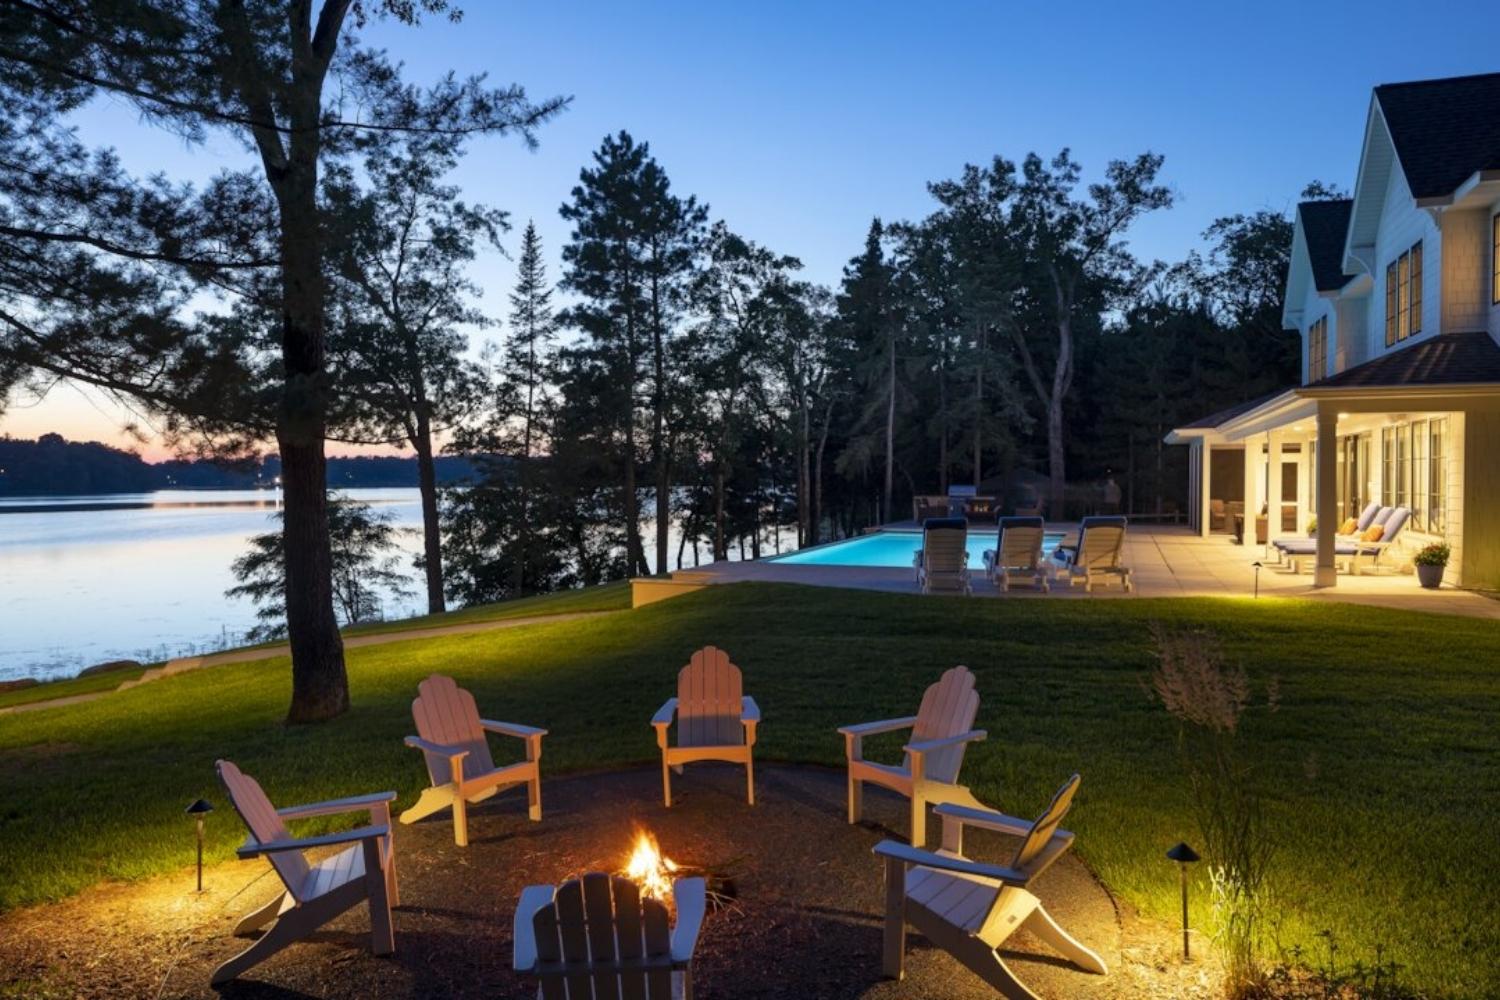 Sun setting on lake house with swimming pool, fire pit